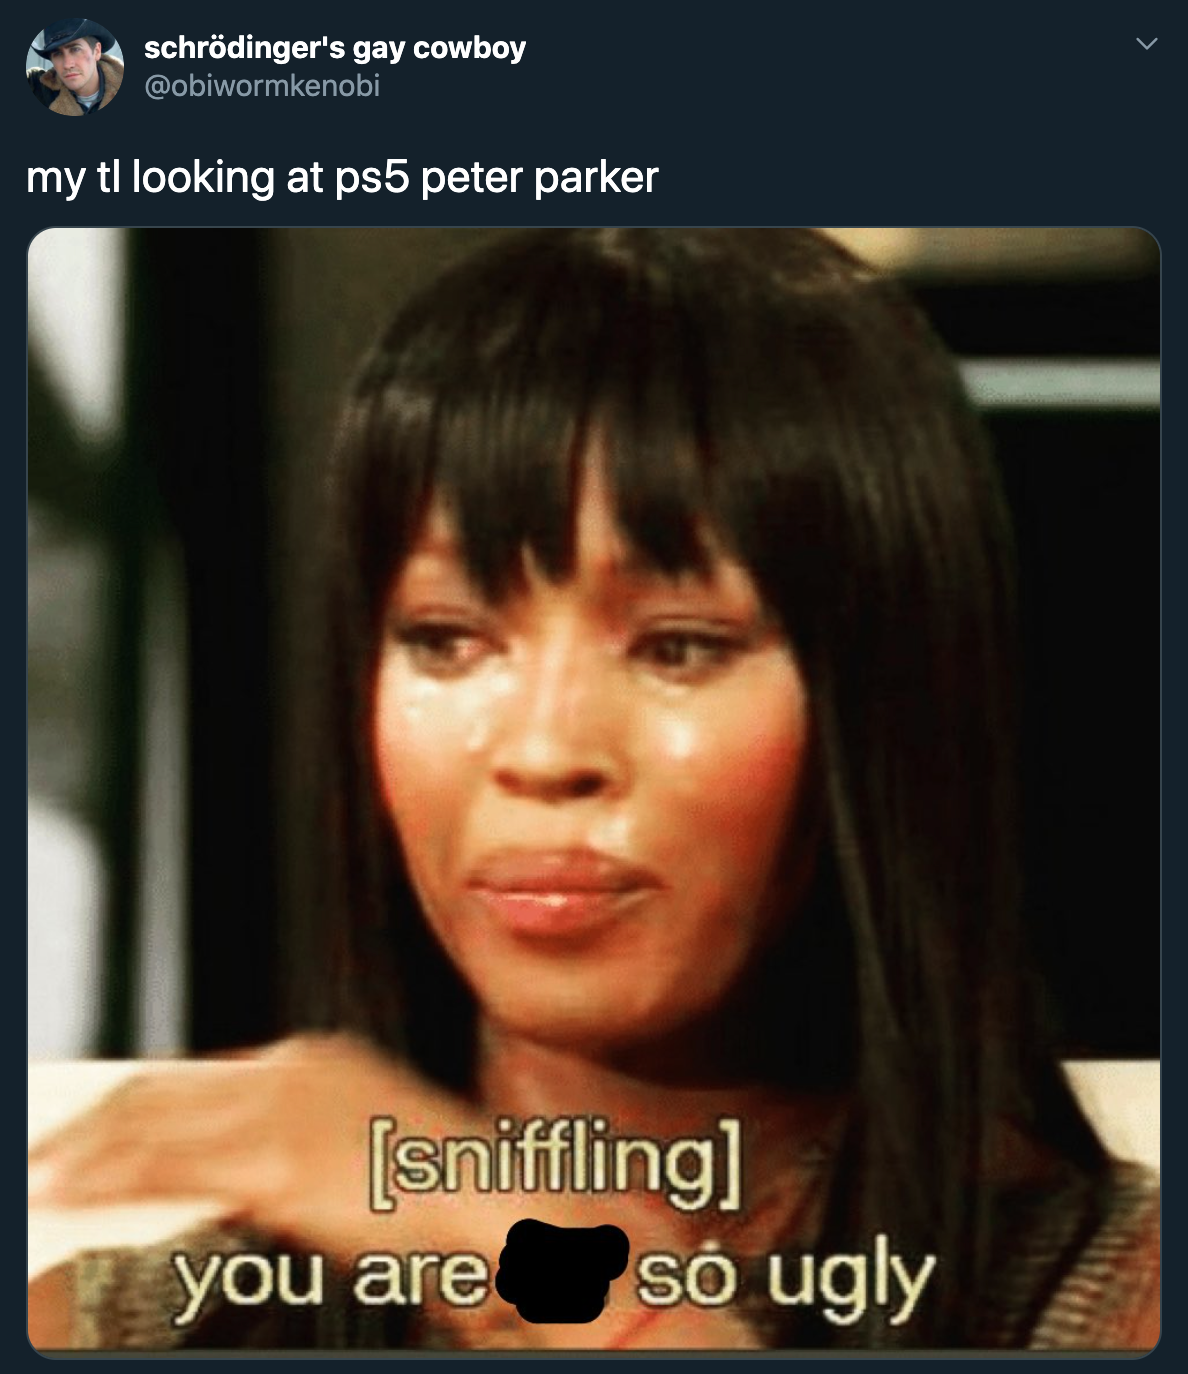 you are all so ugly meme - my tl looking at ps5 peter parker sniffling you are so ugly